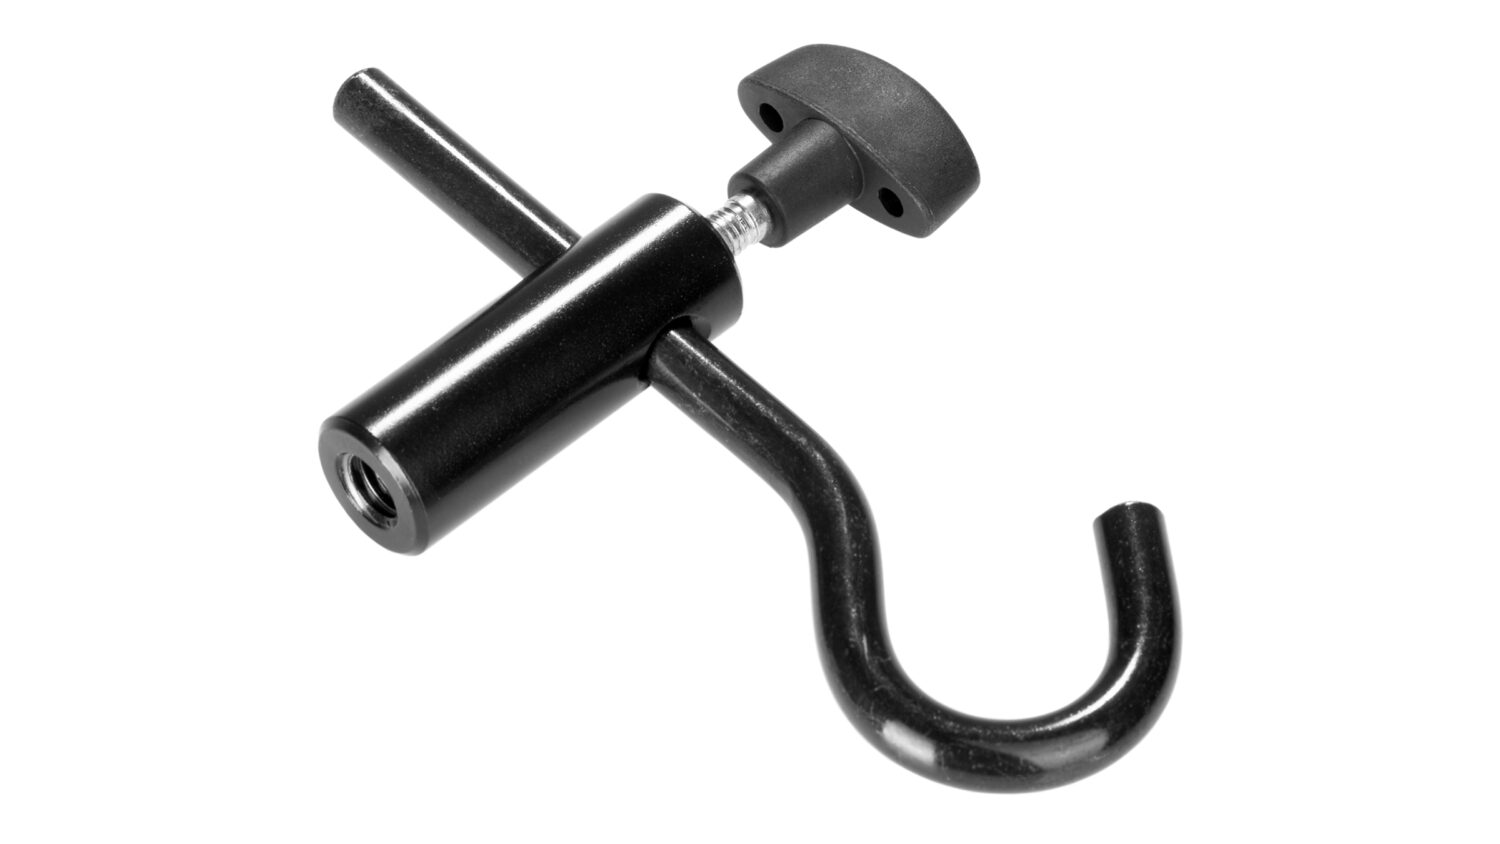 FOBA interchangeable adapter with hook